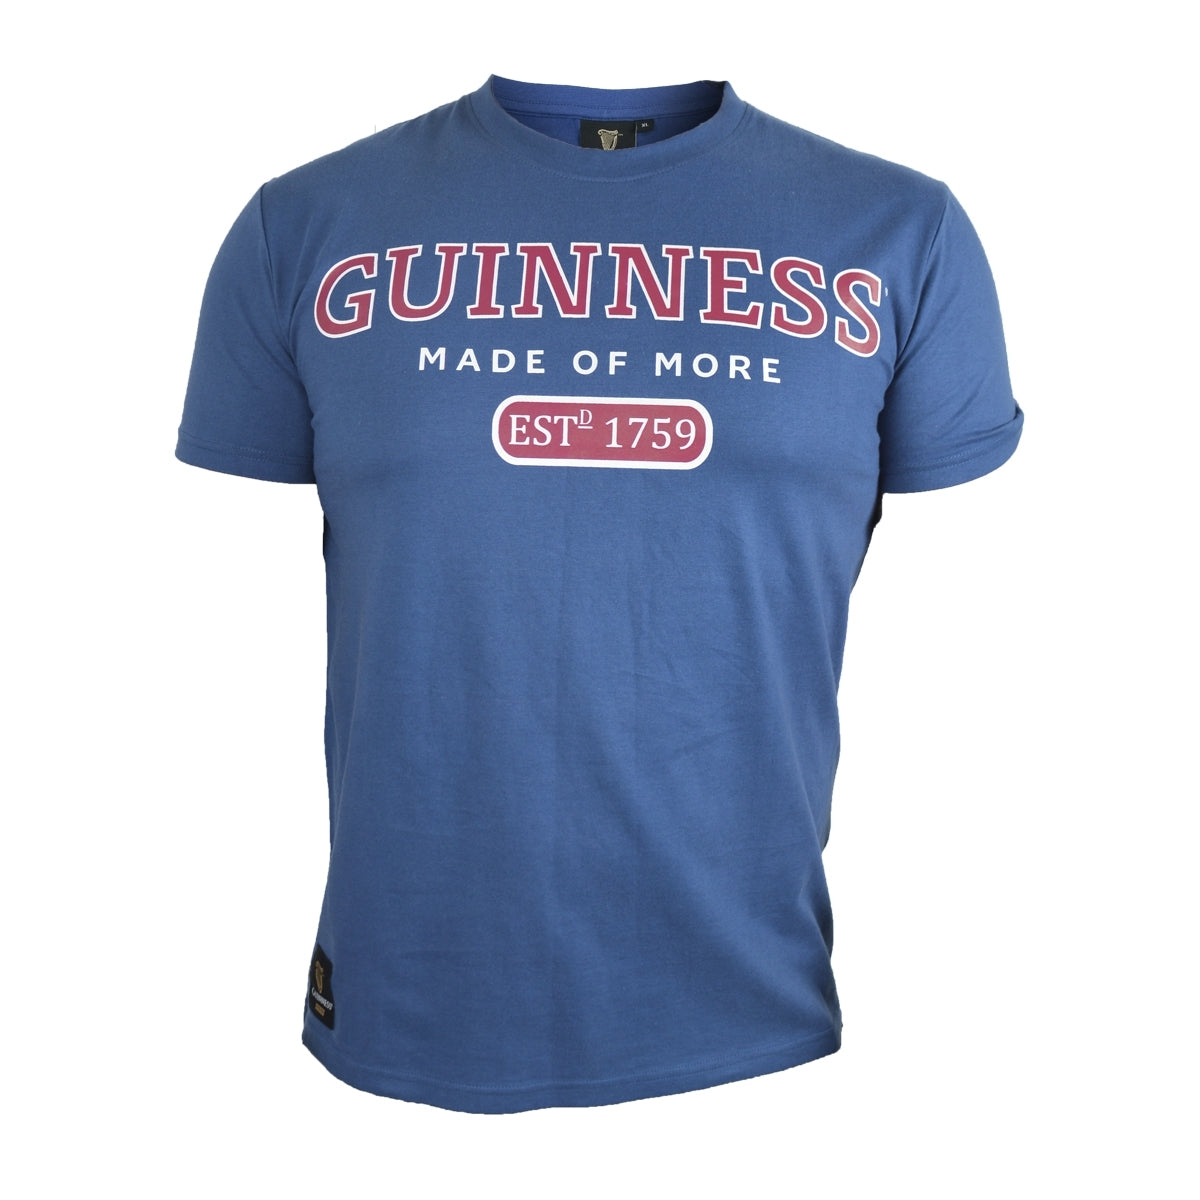 Guinness UK Blue Trademark Label T-Shirt made of rope.